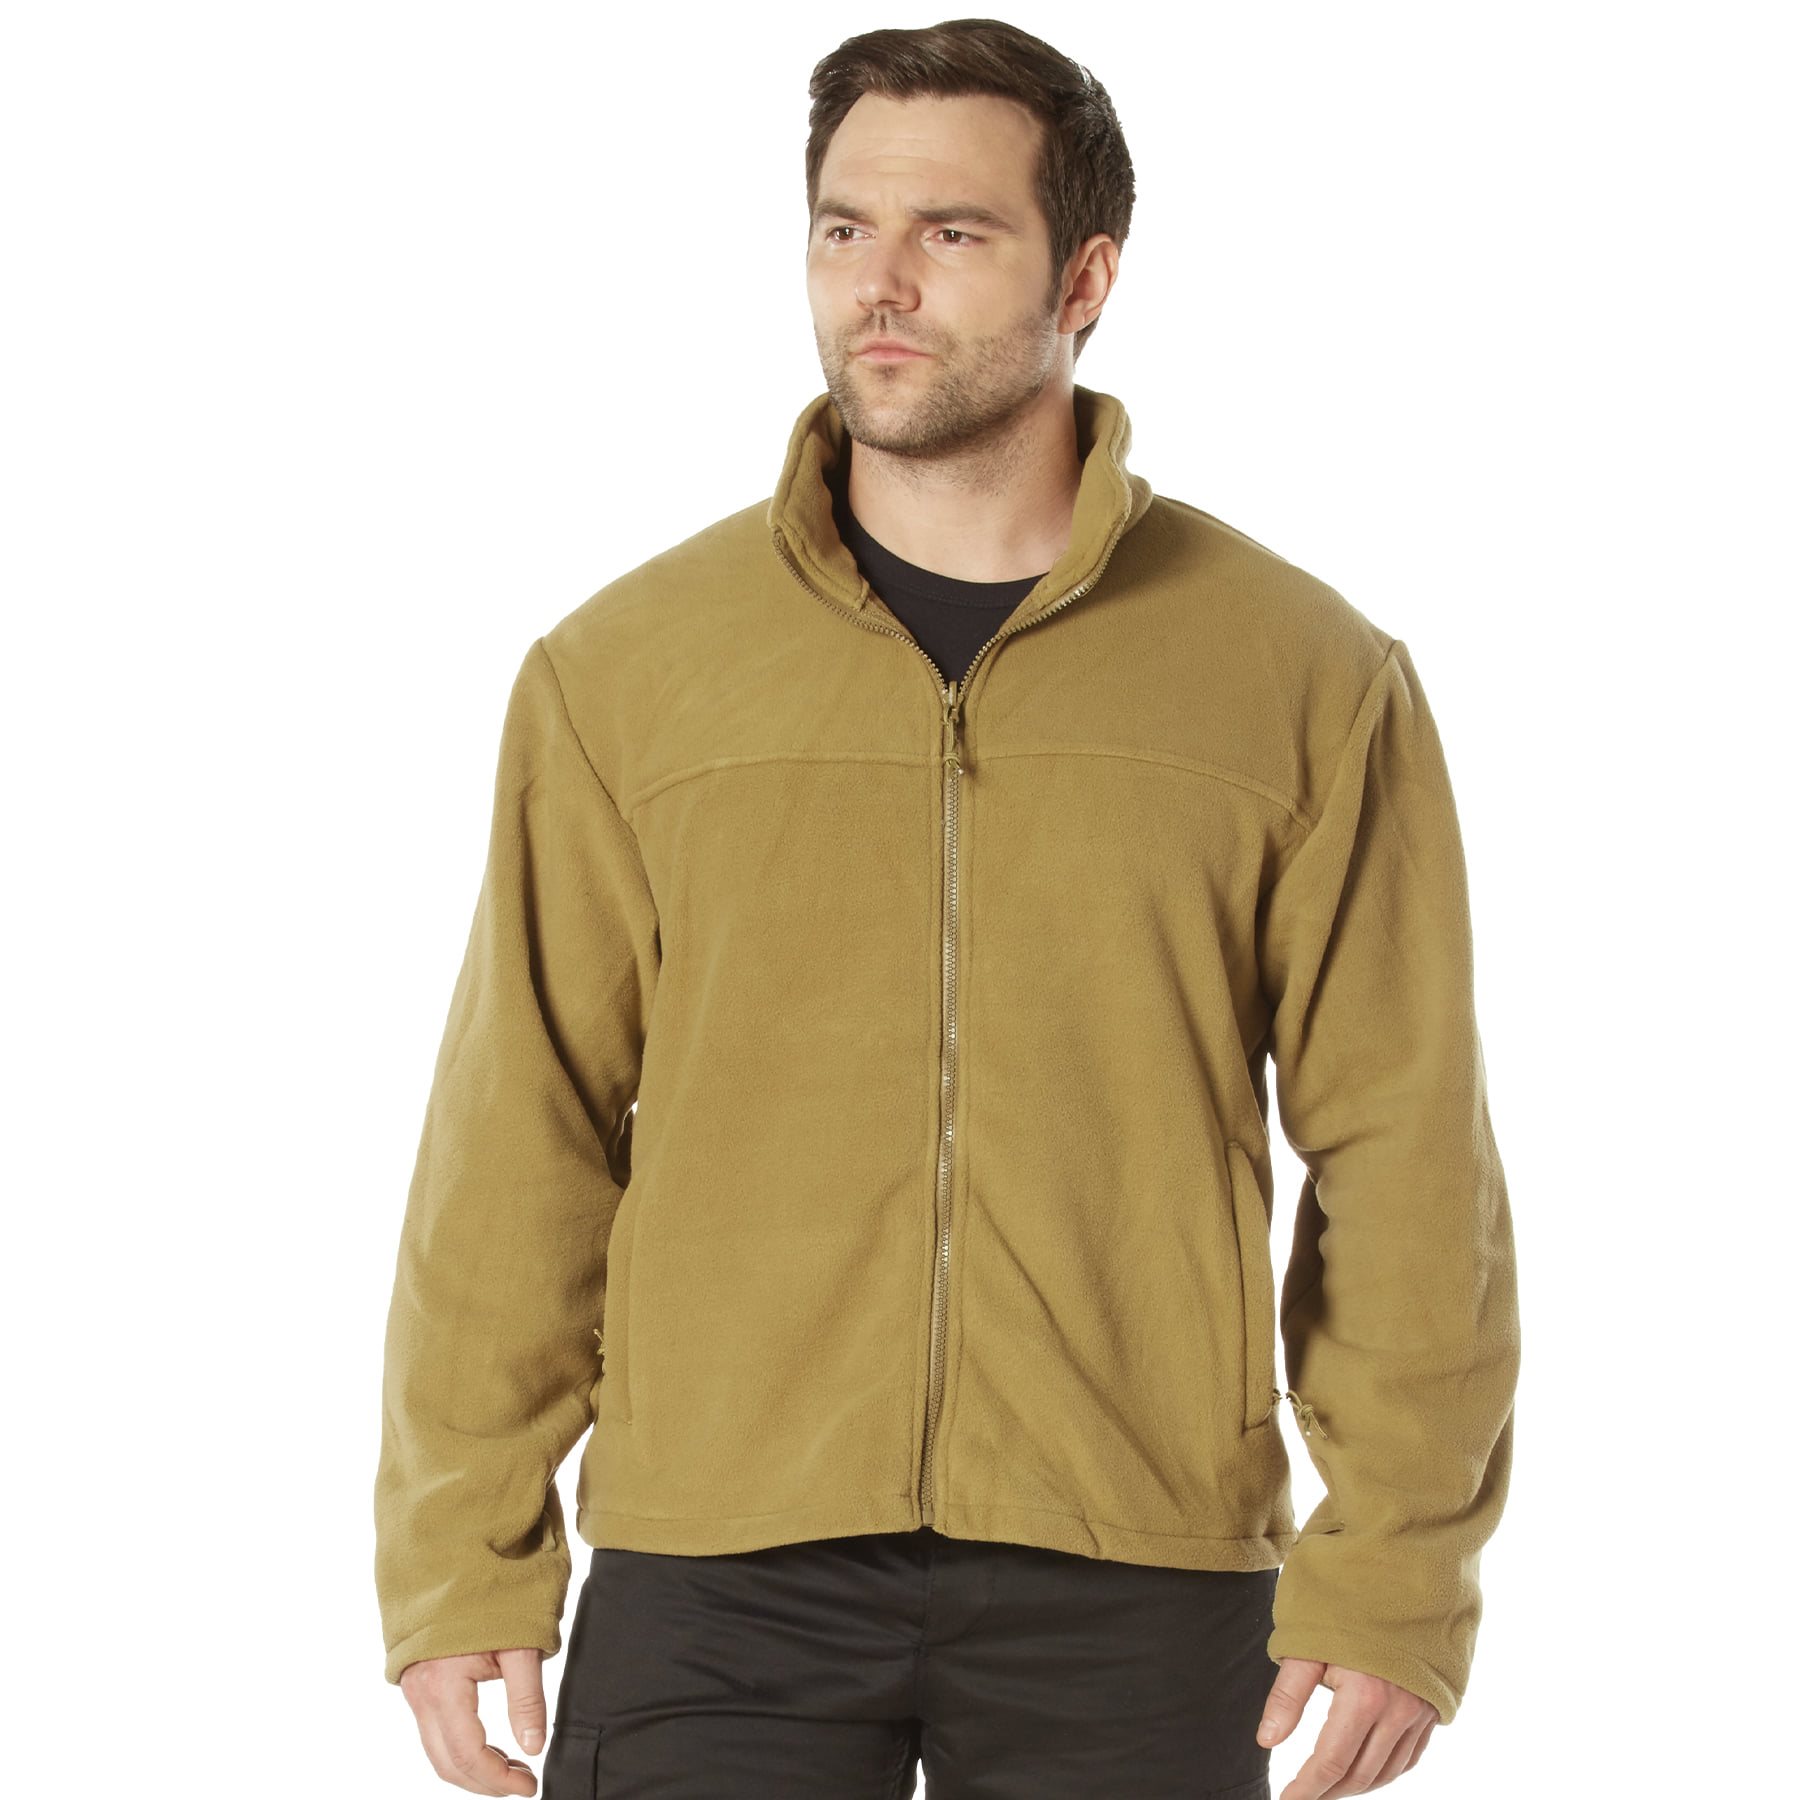 3-in-1 Spec Ops Soft Shell Jacket COYOTE ROTHCO 3128 L-11